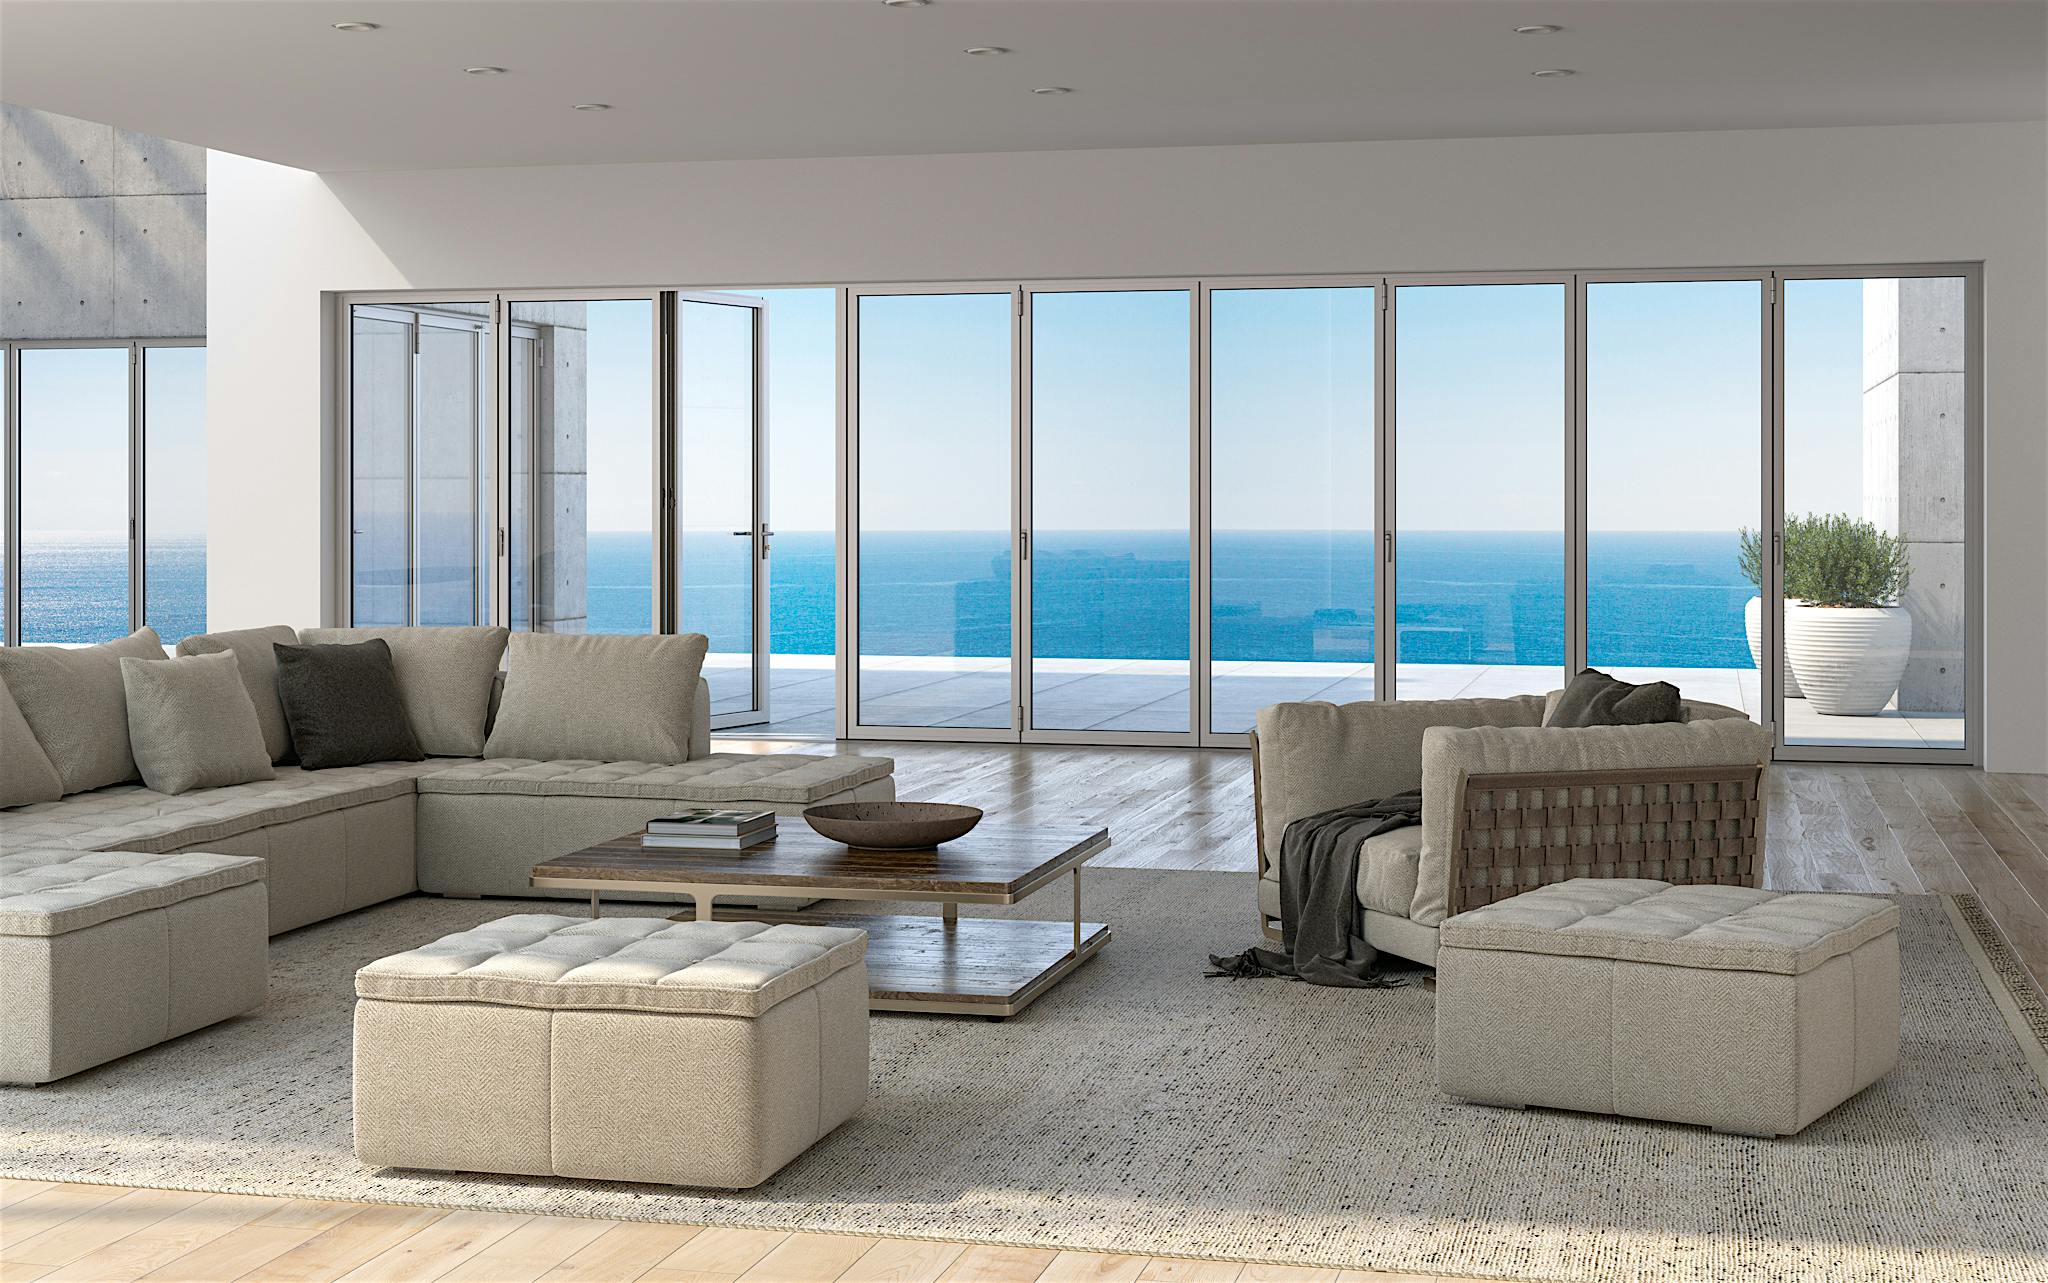 residential glass walls with ocean views